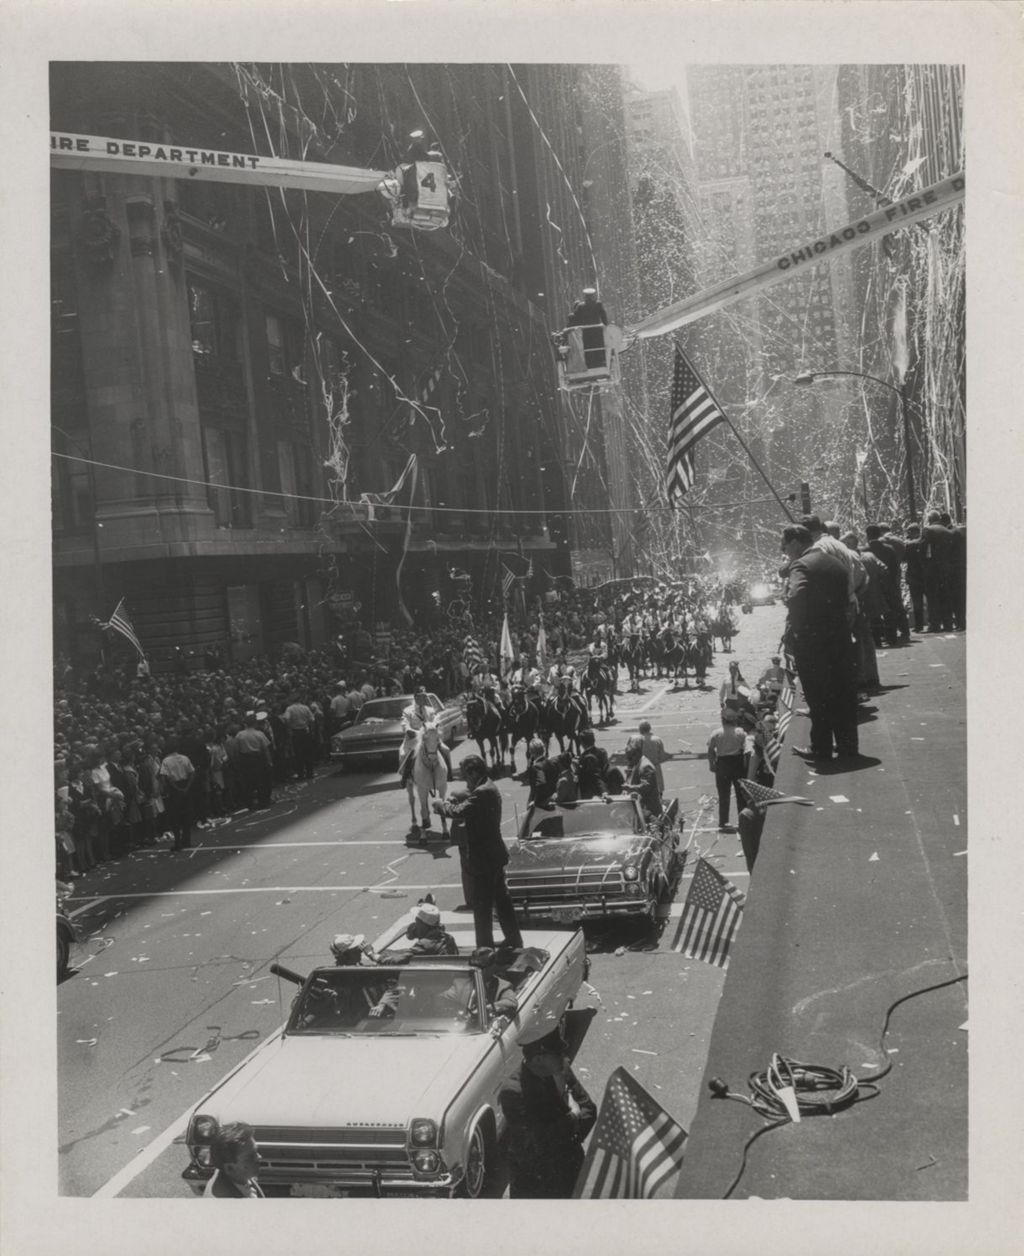 Edward H. White, Hubert Humphrey and James McDivitt in a parade for the astronauts